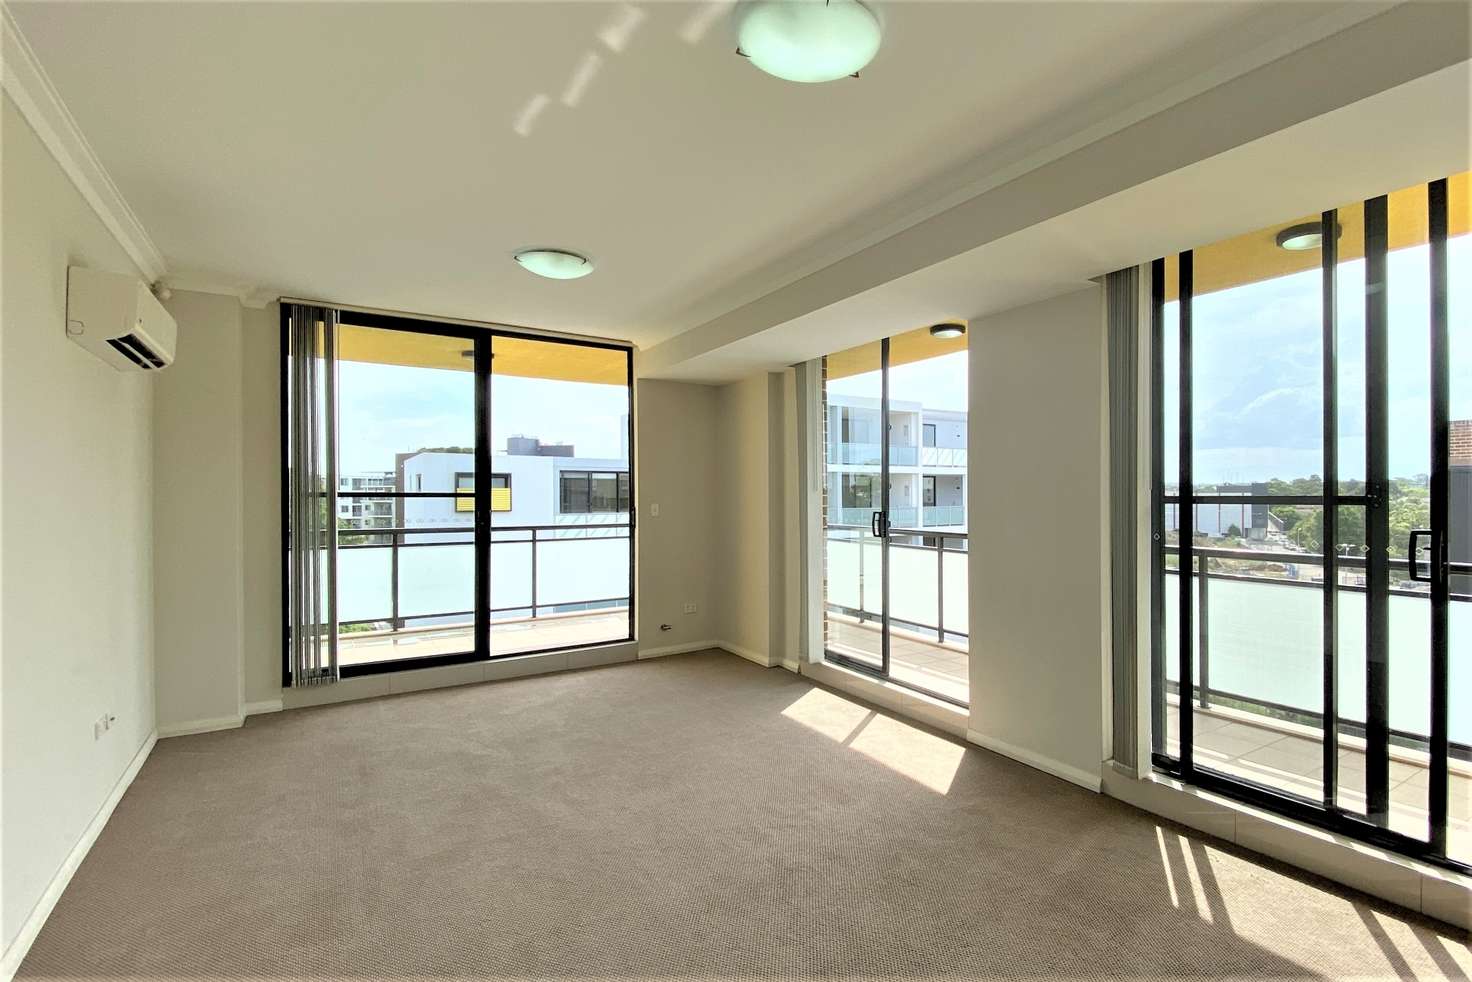 Main view of Homely apartment listing, 67/76-84 Railway Terrace, Merrylands NSW 2160